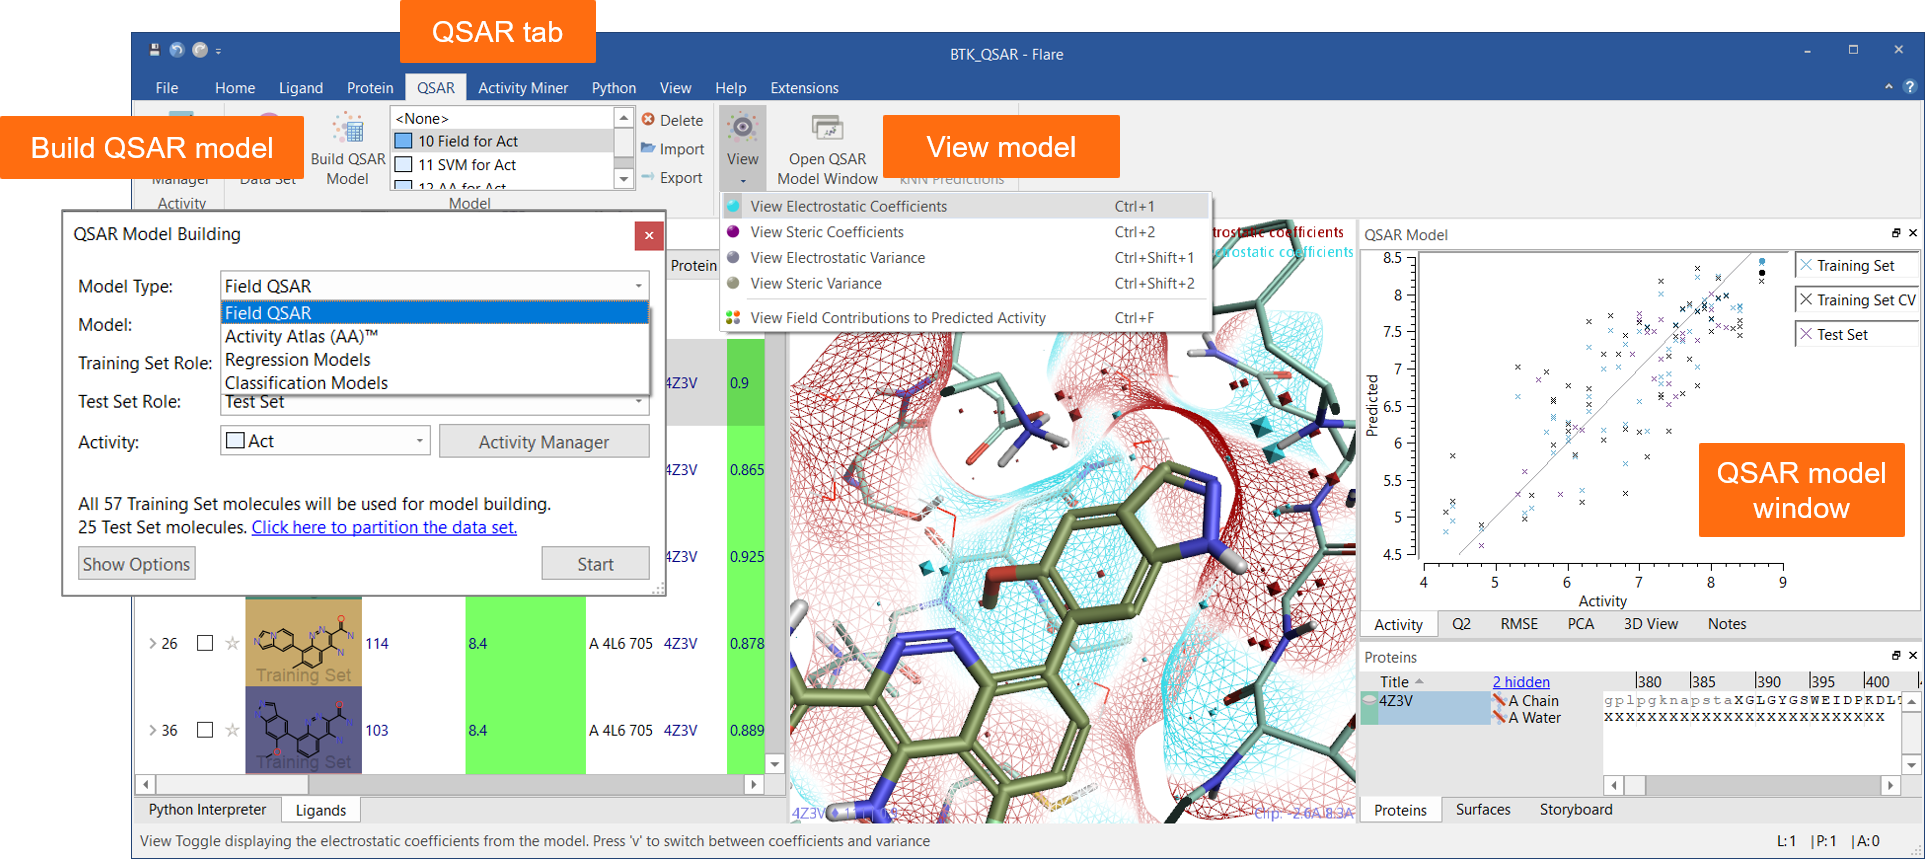 Figure 1: The QSAR tab and the QSAR Model window are a seamless interface to QSAR model building and visualization of results in Flare.